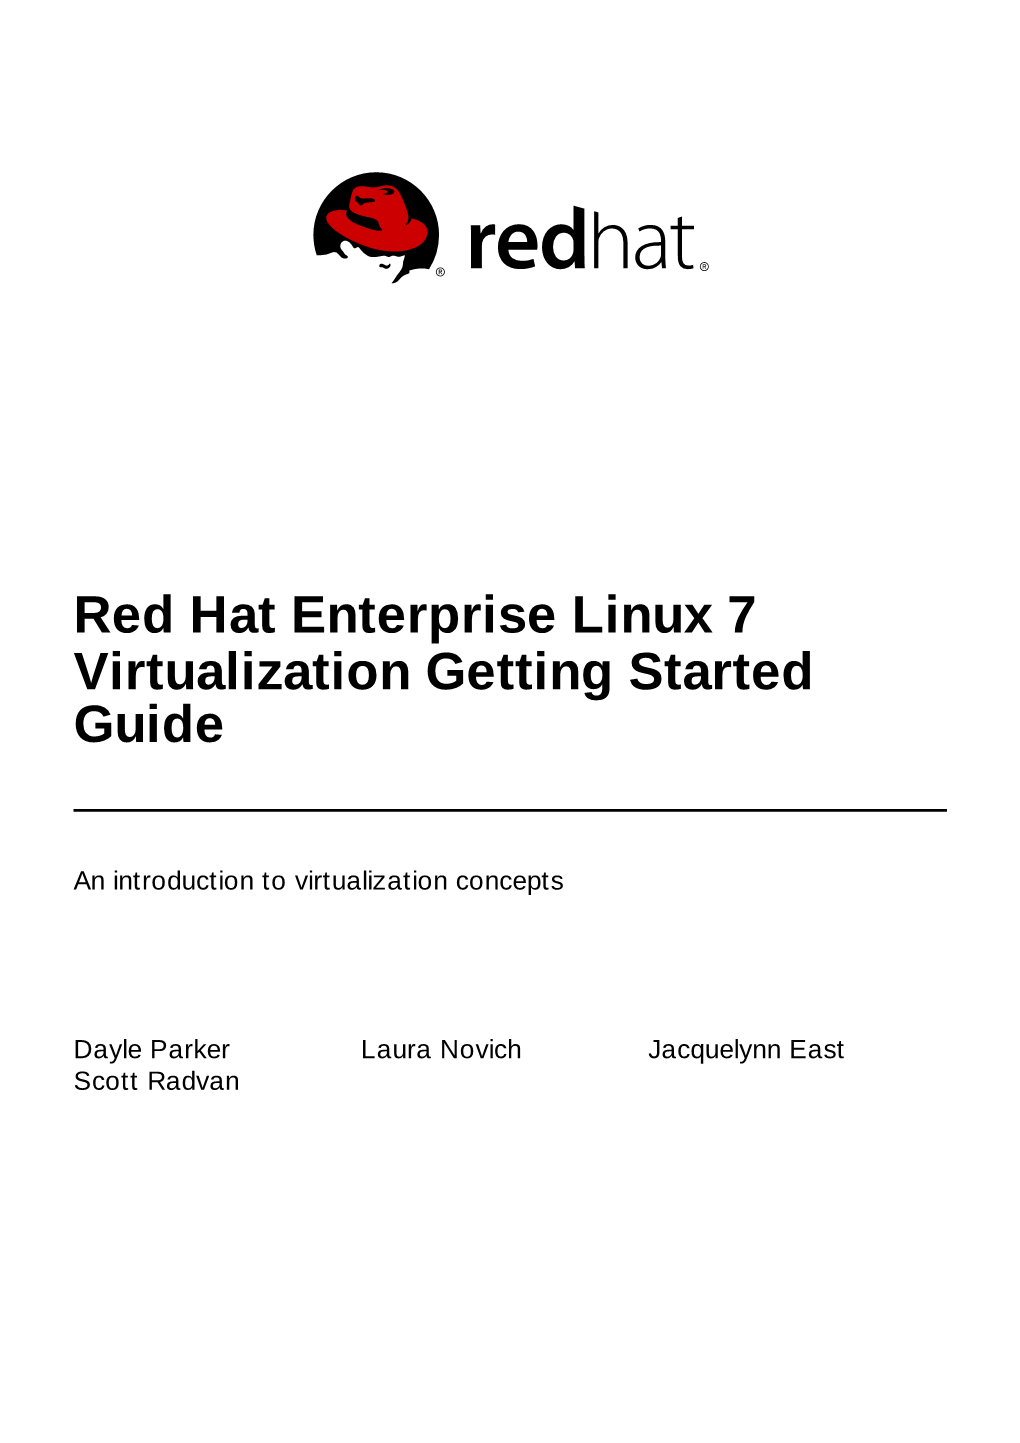 Red Hat Enterprise Linux 7 Virtualization Getting Started Guide